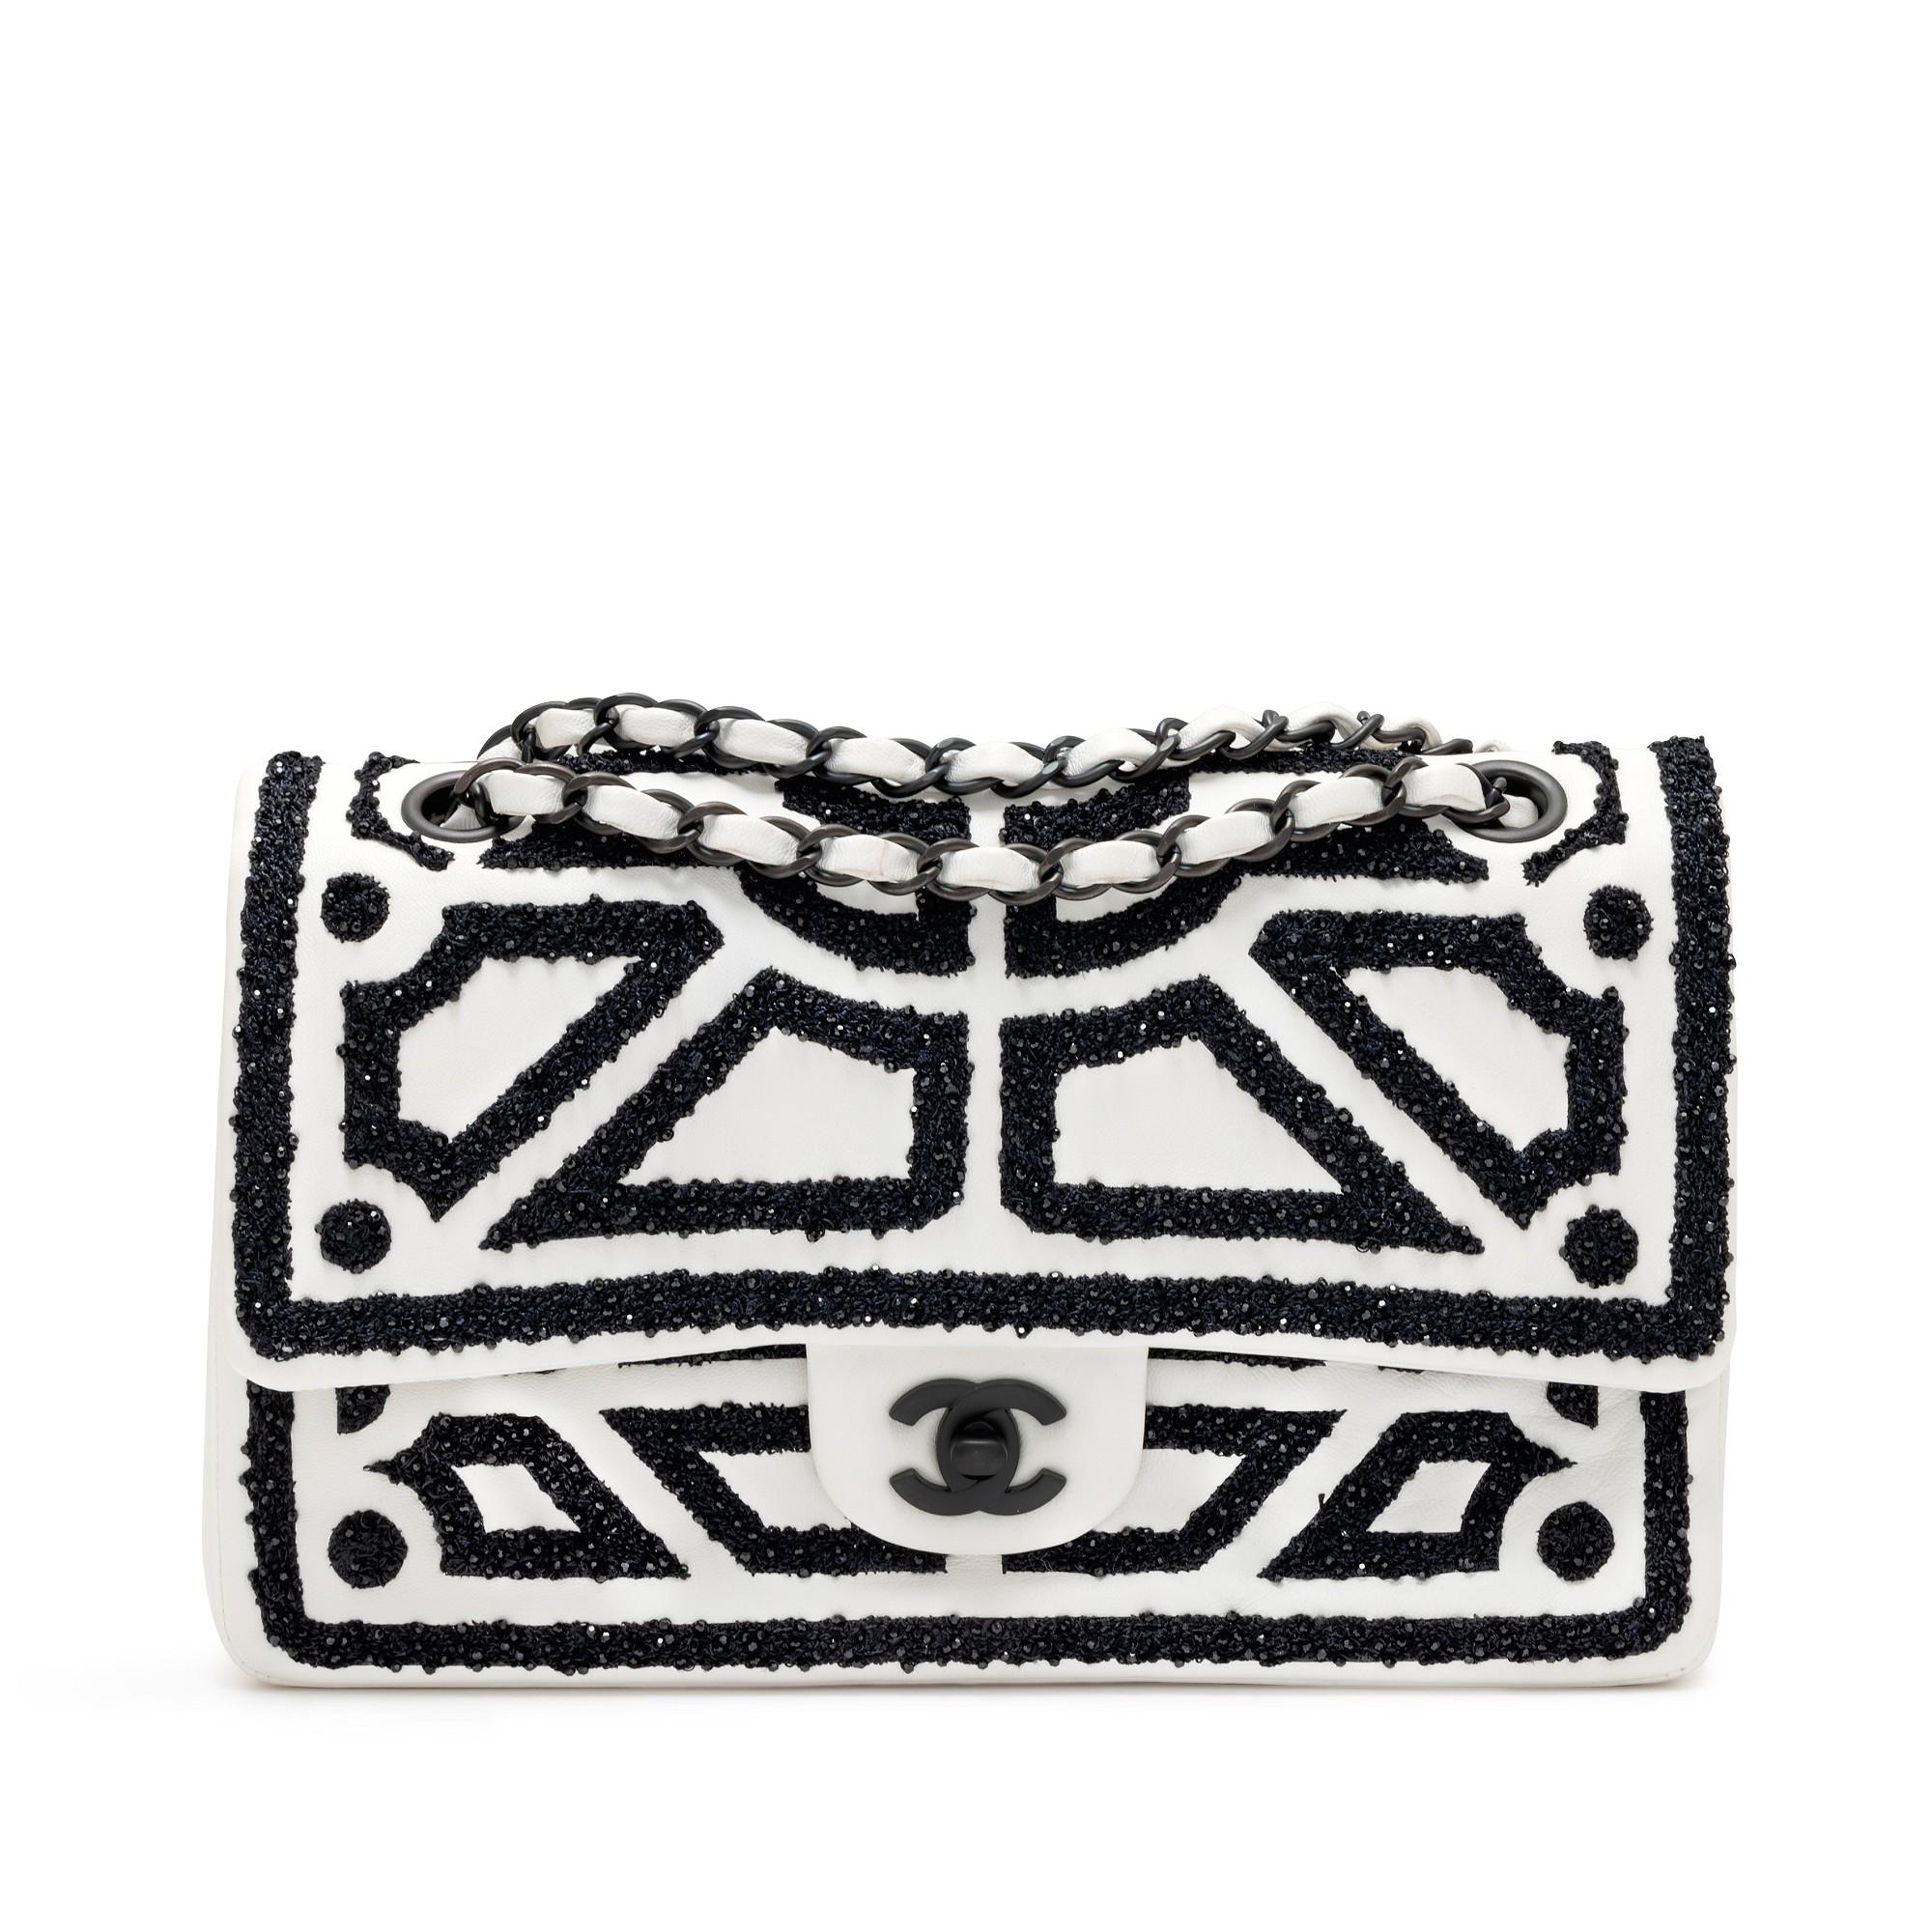 Chanel 2011 Vintage Classic Flap White and Black Lambskin Leather Shoulder Bag For Sale 1